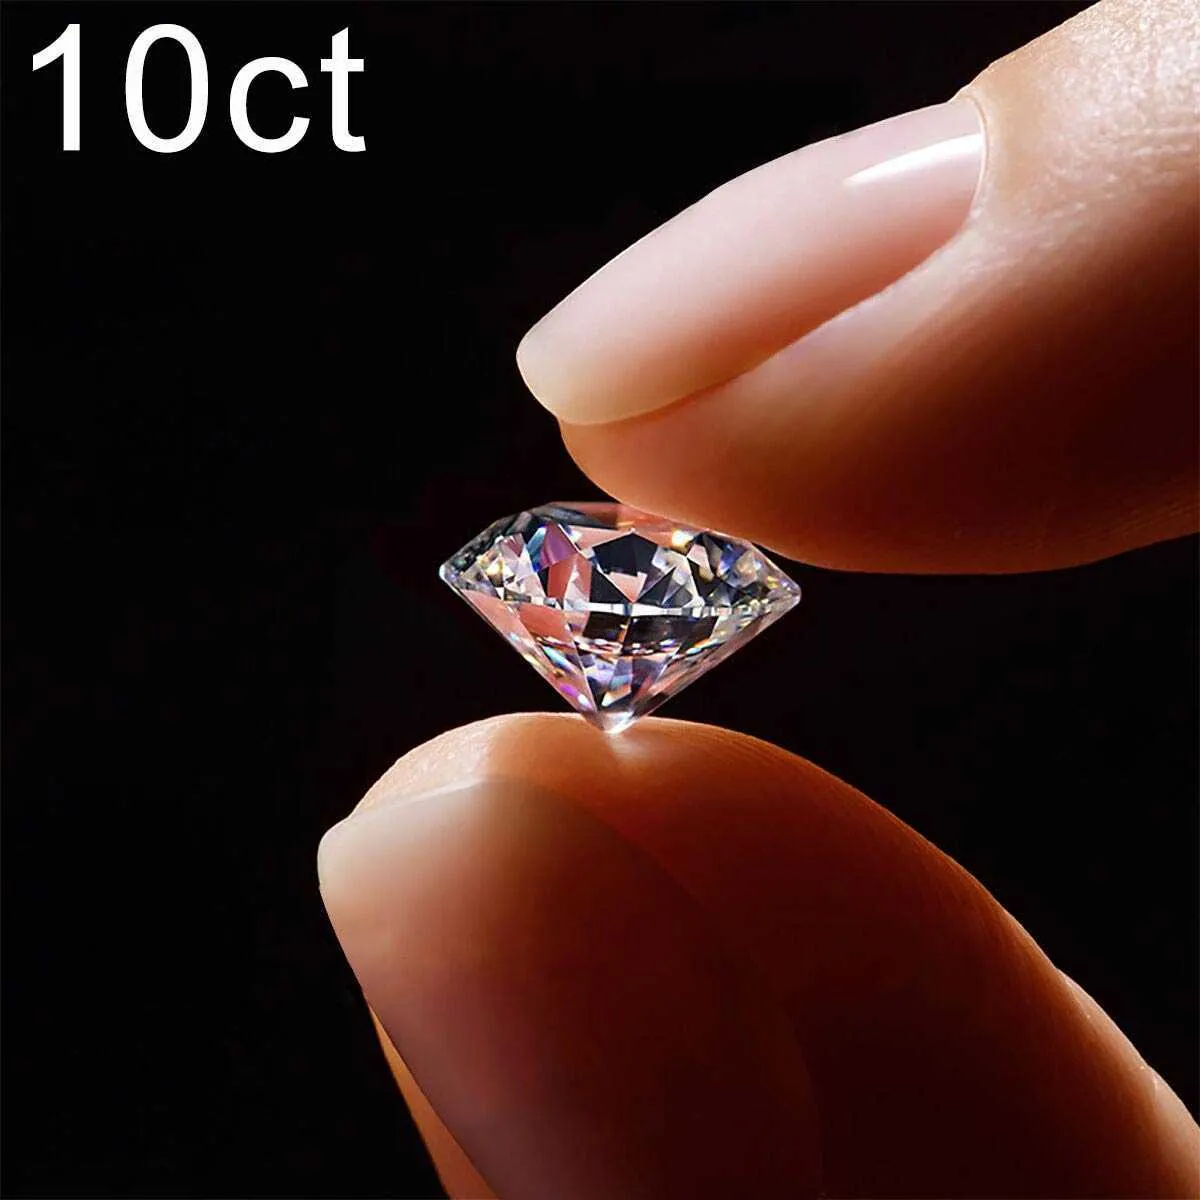 10ct 14mm D Color VVS1 100% Real Loose Gemstones Moissanite Stone CVD Diamond Lab With GRA Certificate For Womens Jewelry Ring H1015